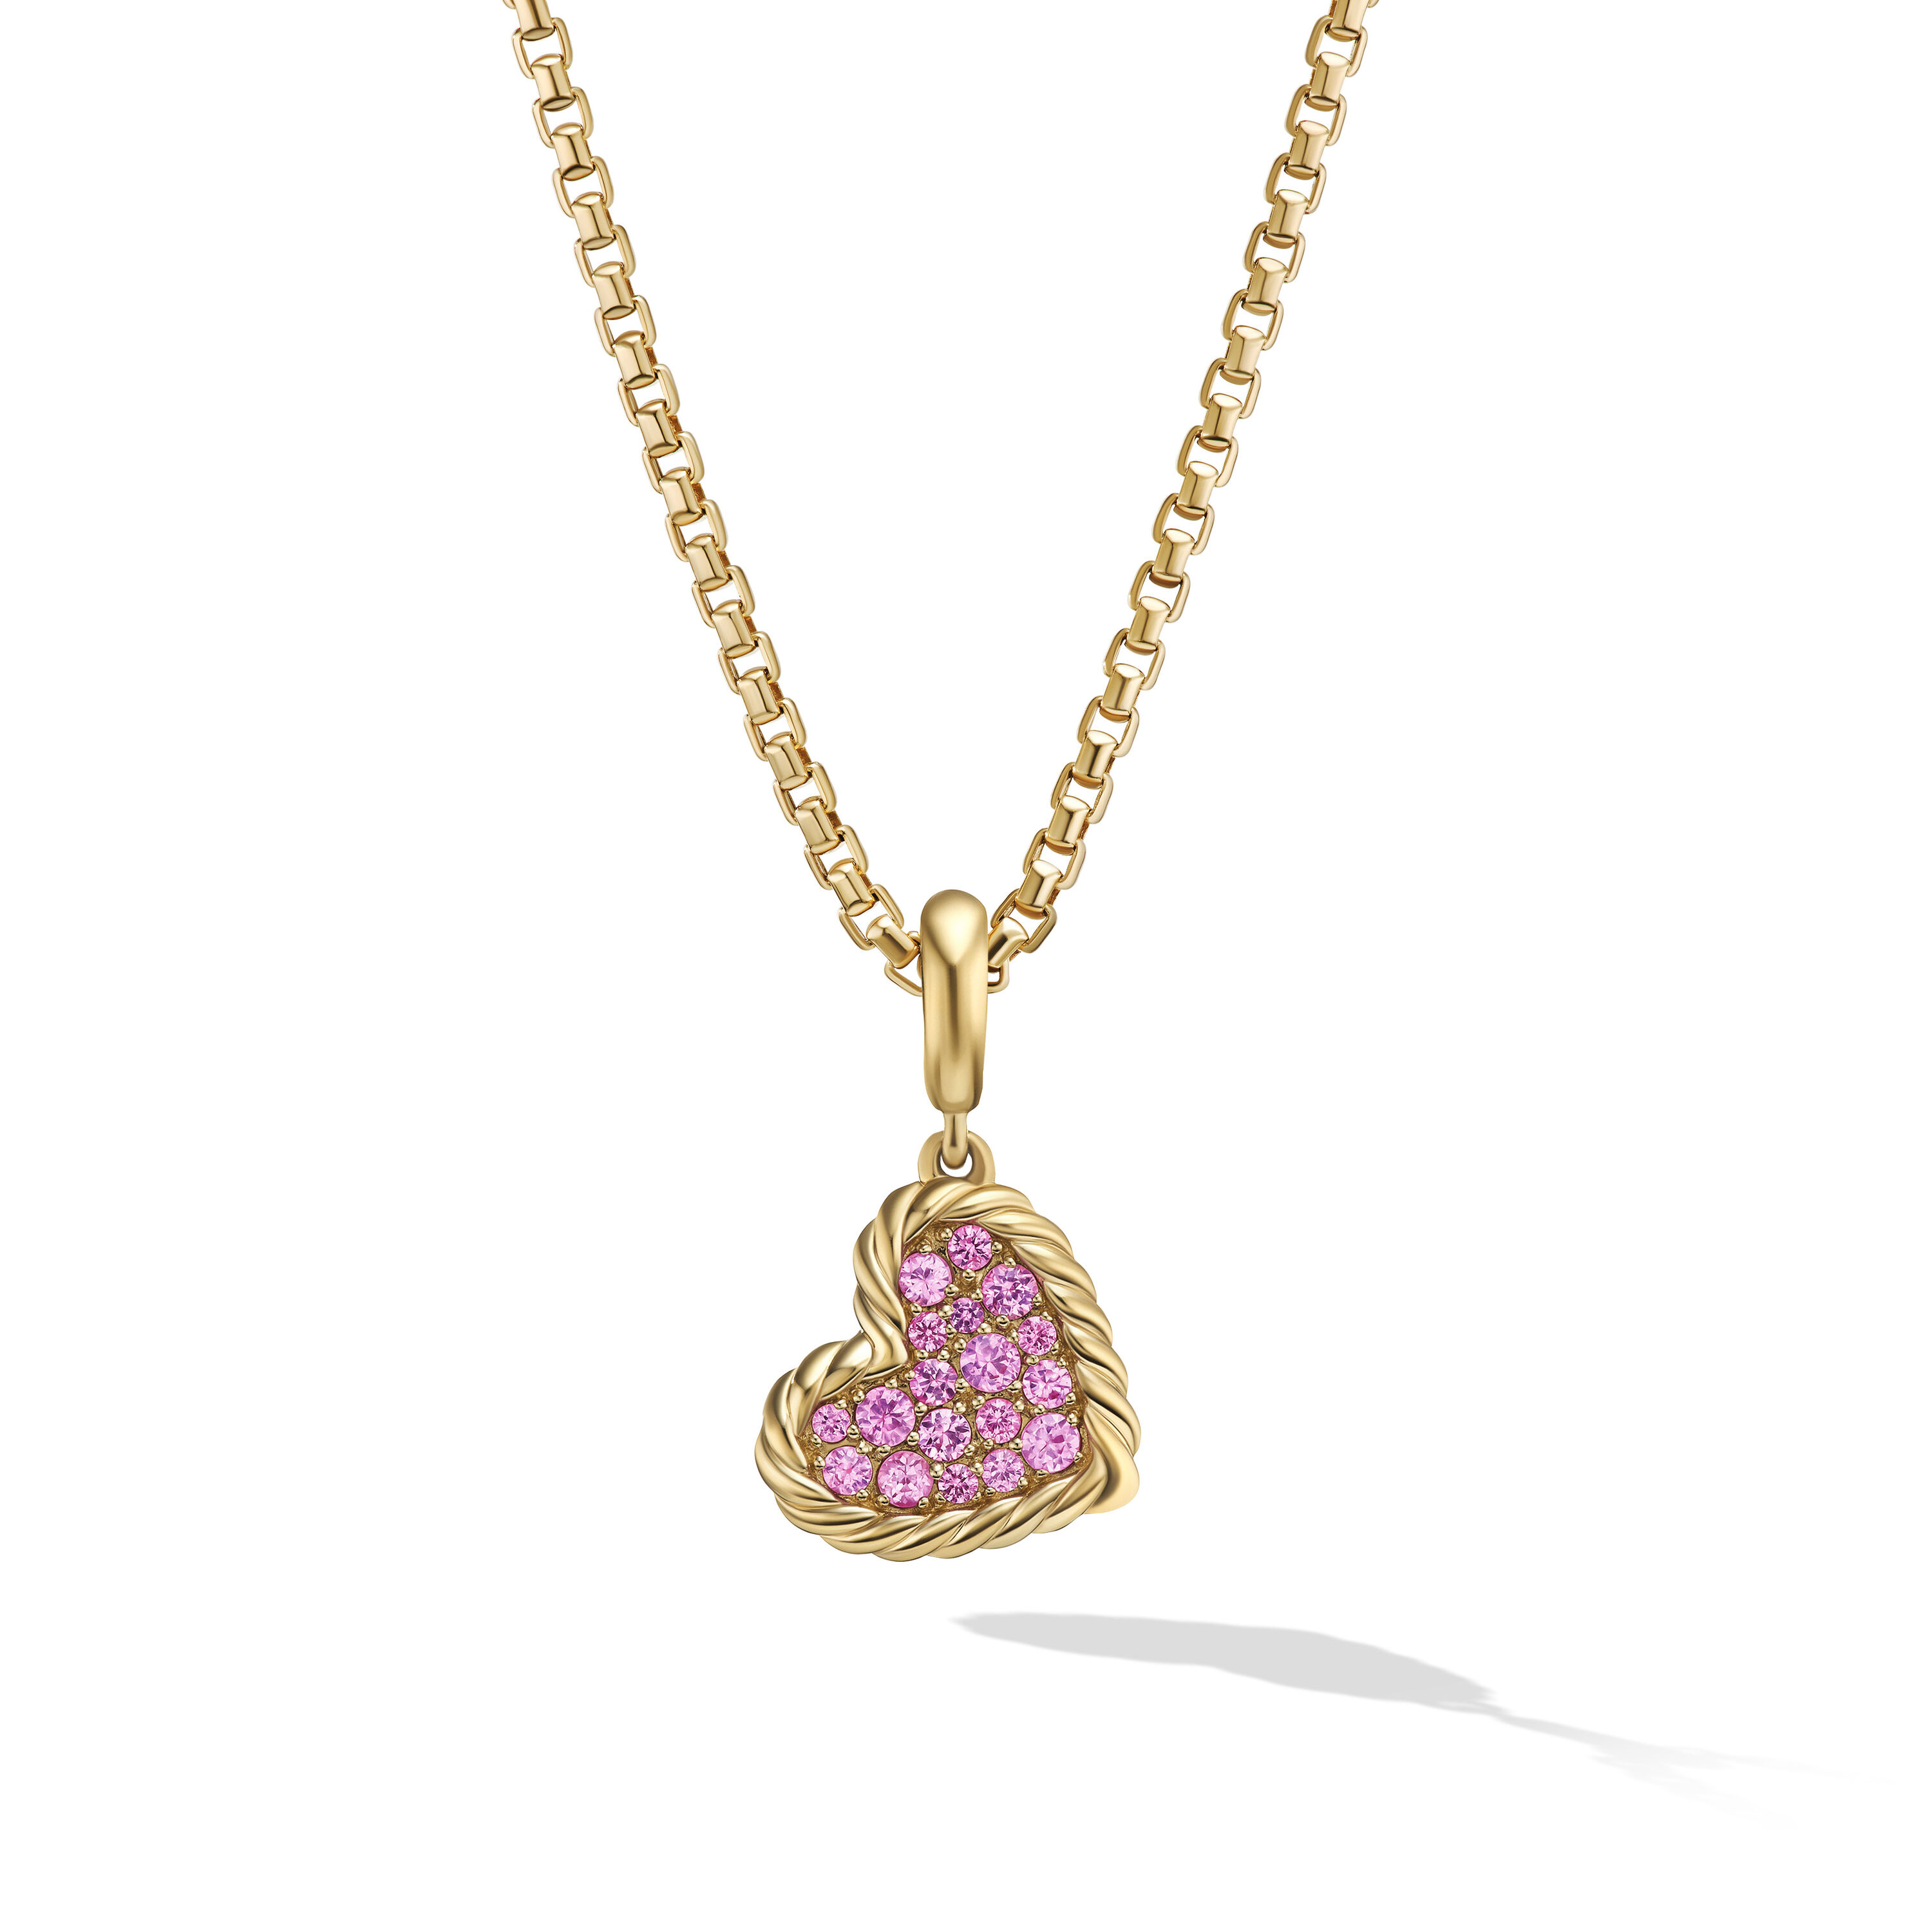 DY Elements® Heart Pendant in 18K Yellow Gold with Pavé Pink Sapphires, 12.6mm